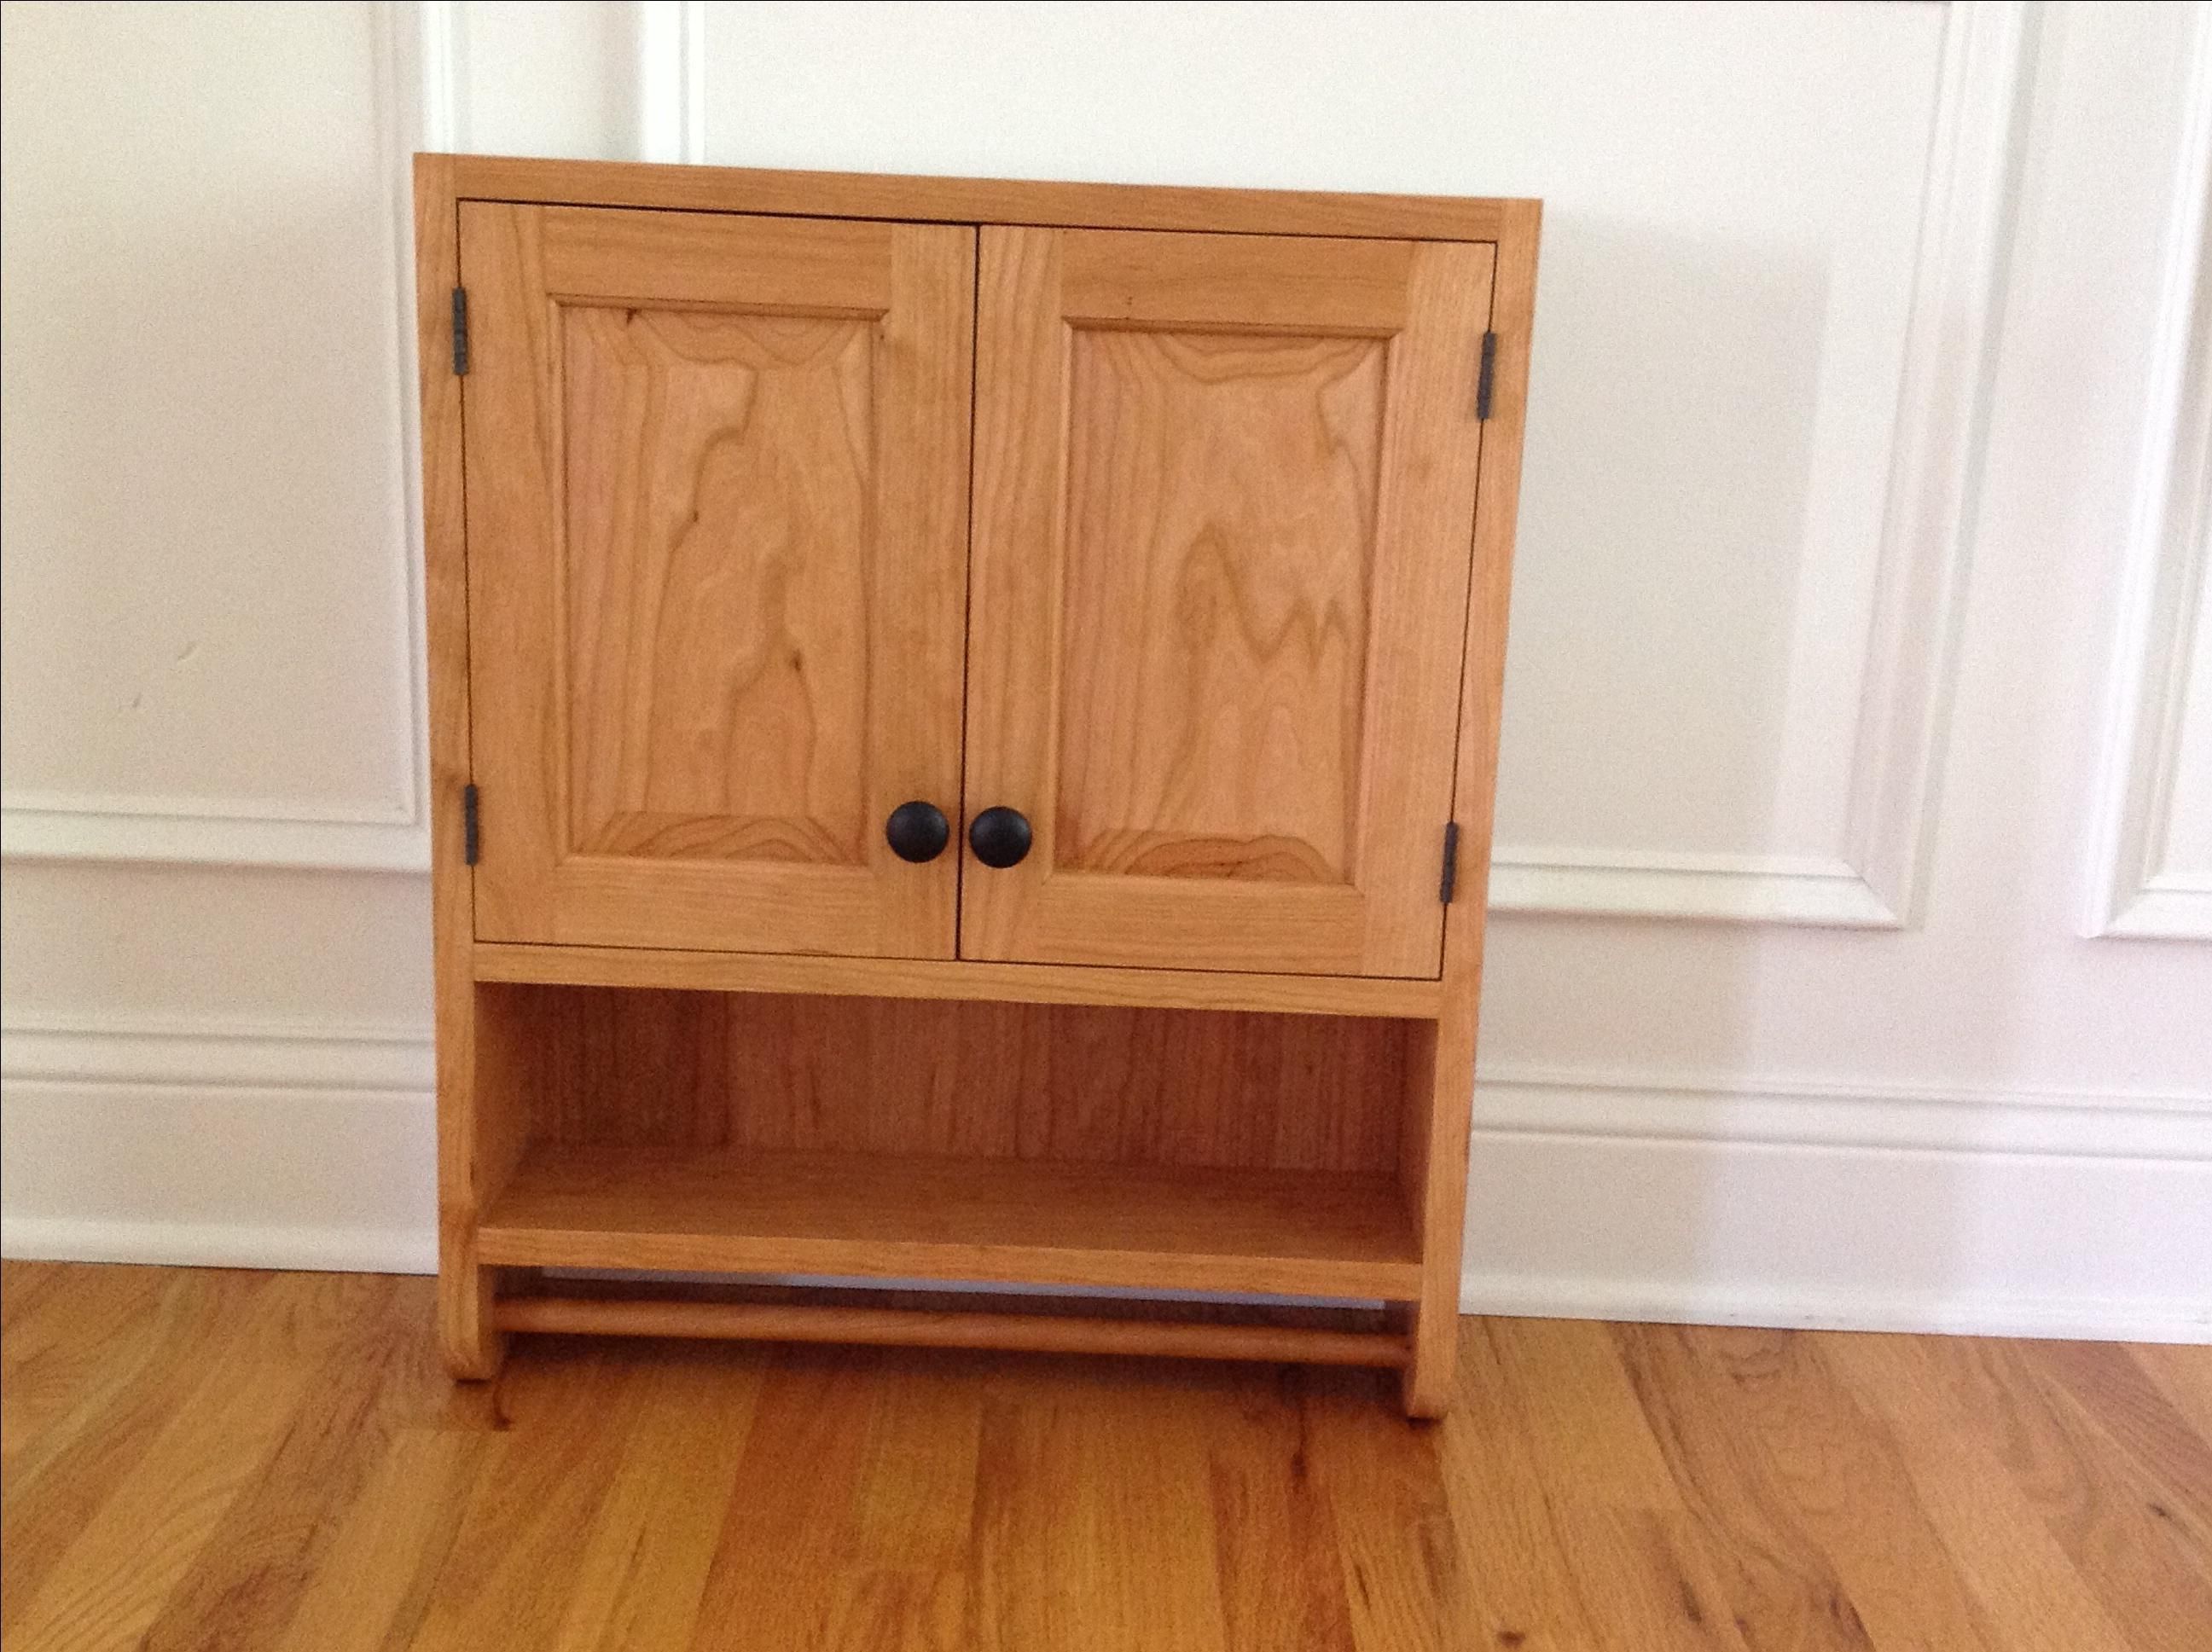 Buy A Hand Crafted Wall Mounting Cabinet Made To Order From